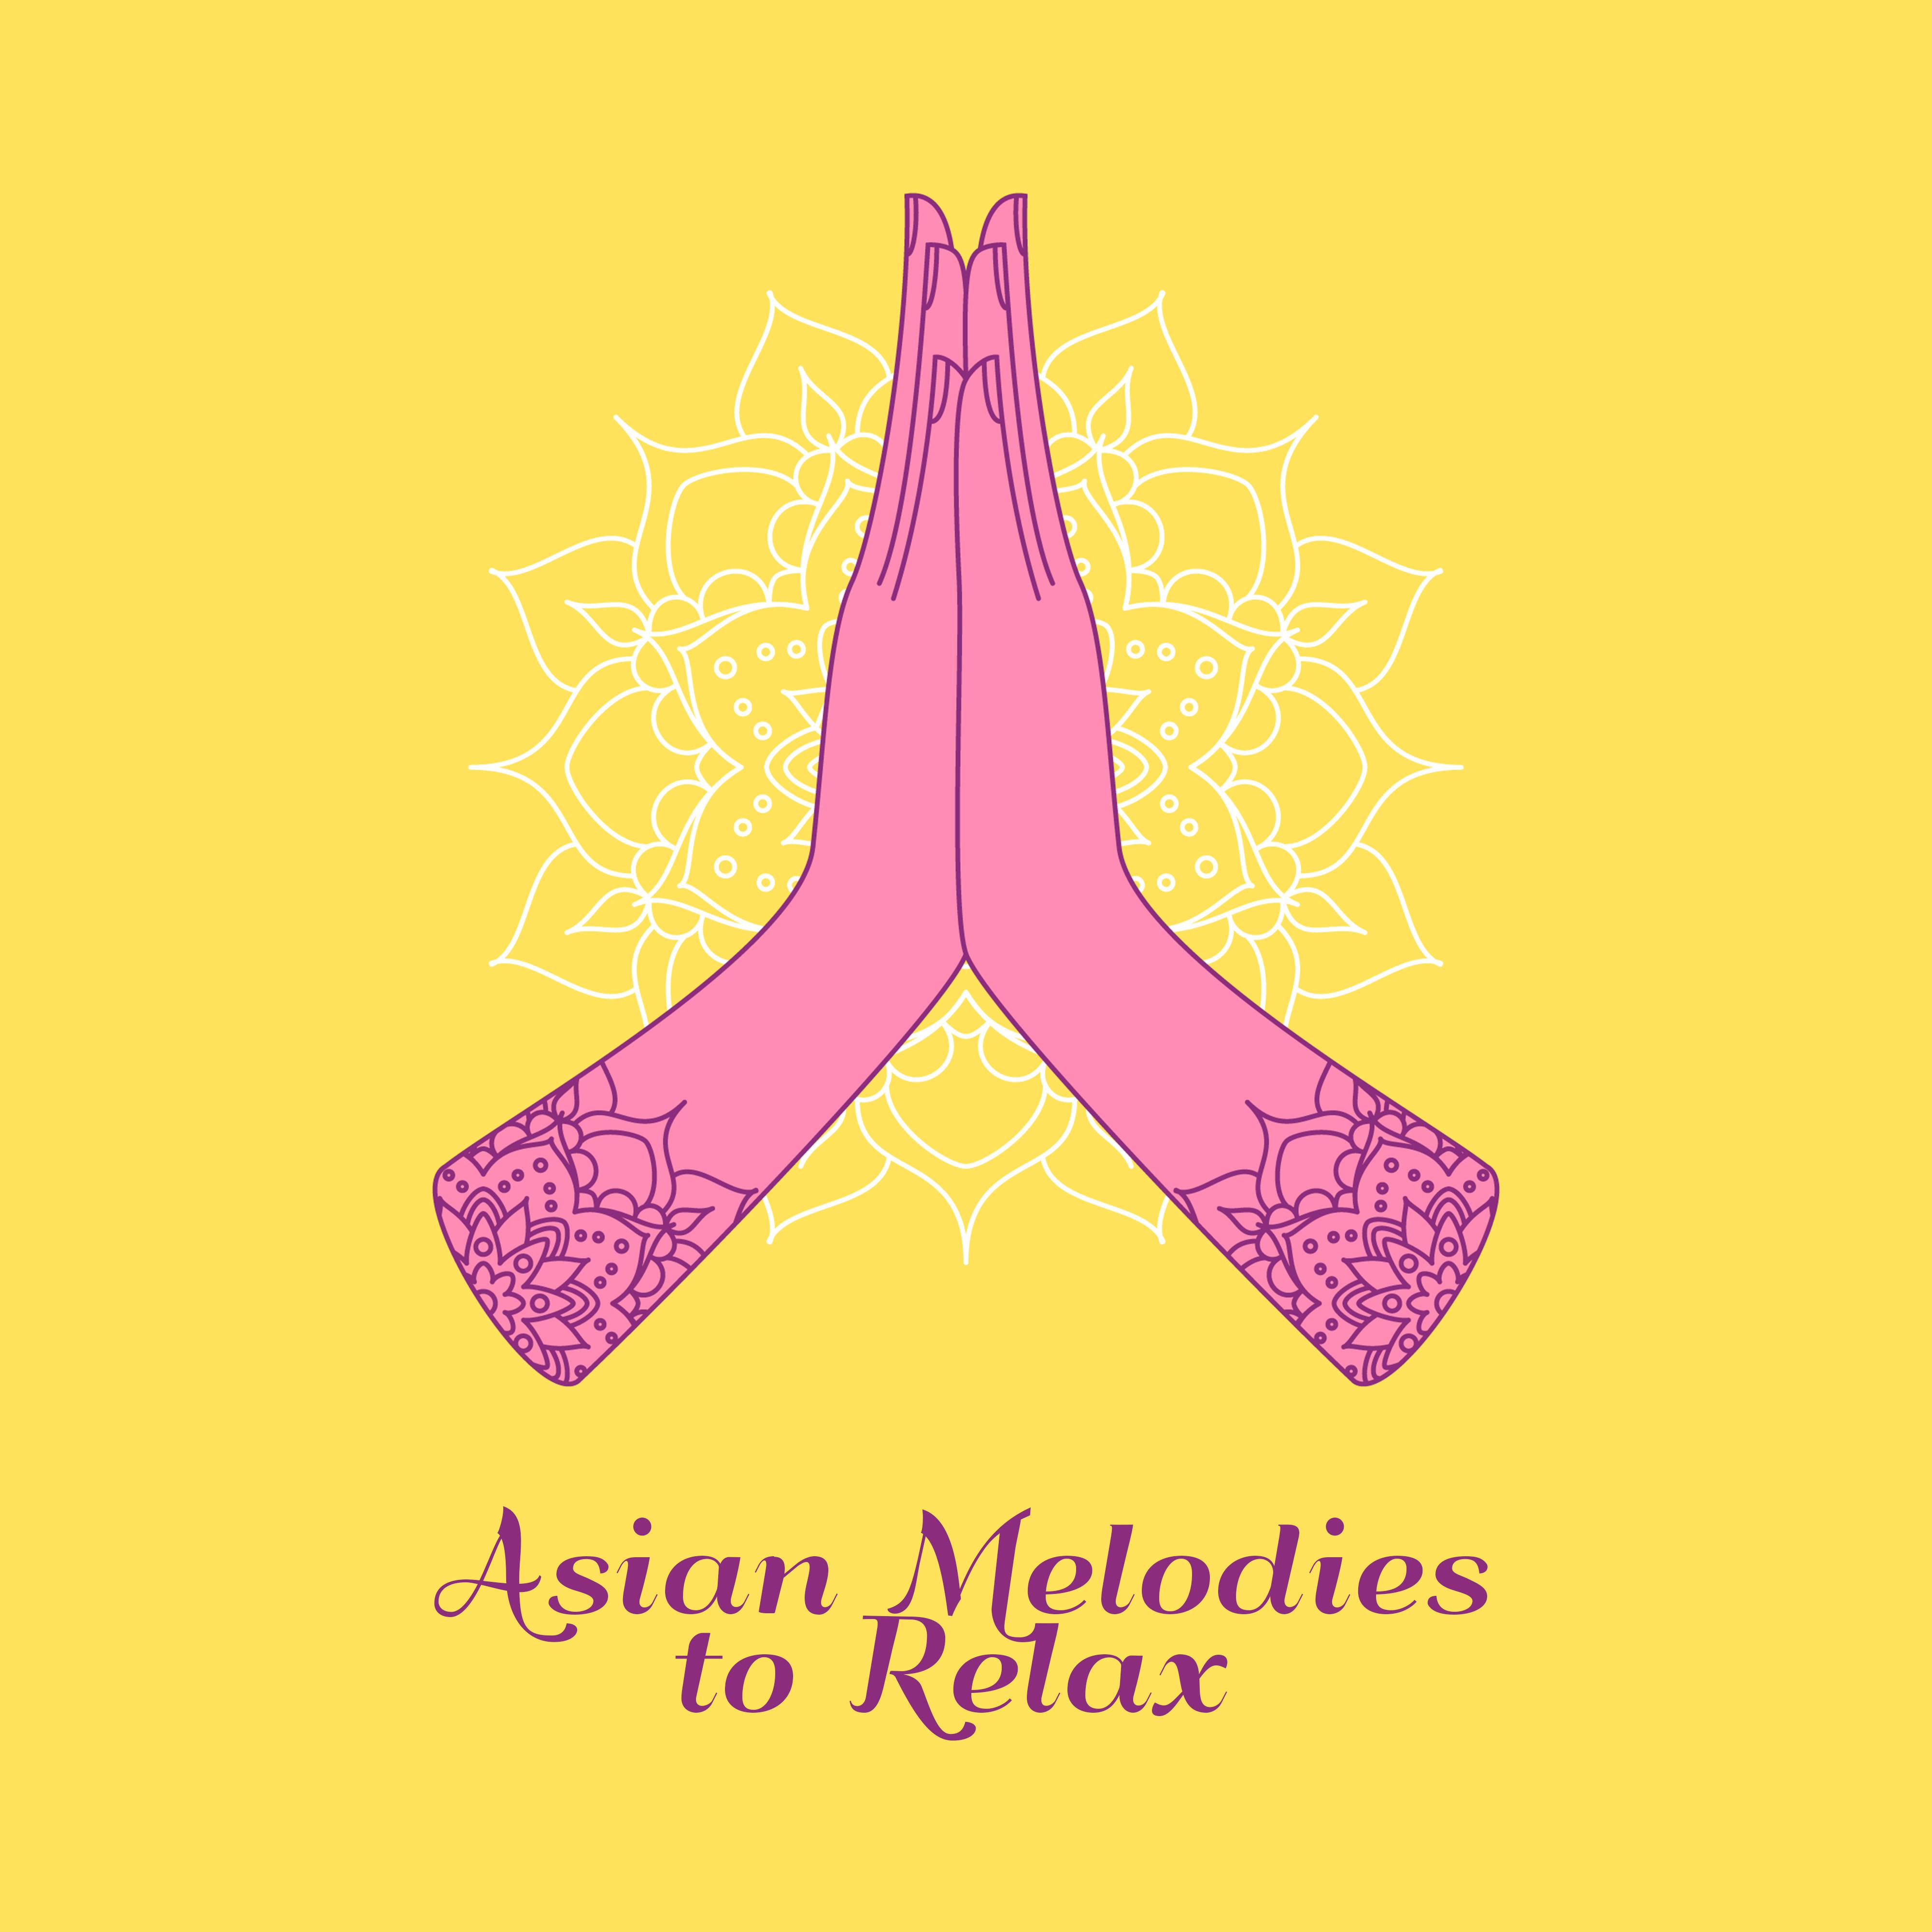 Asian Melodies to Relax